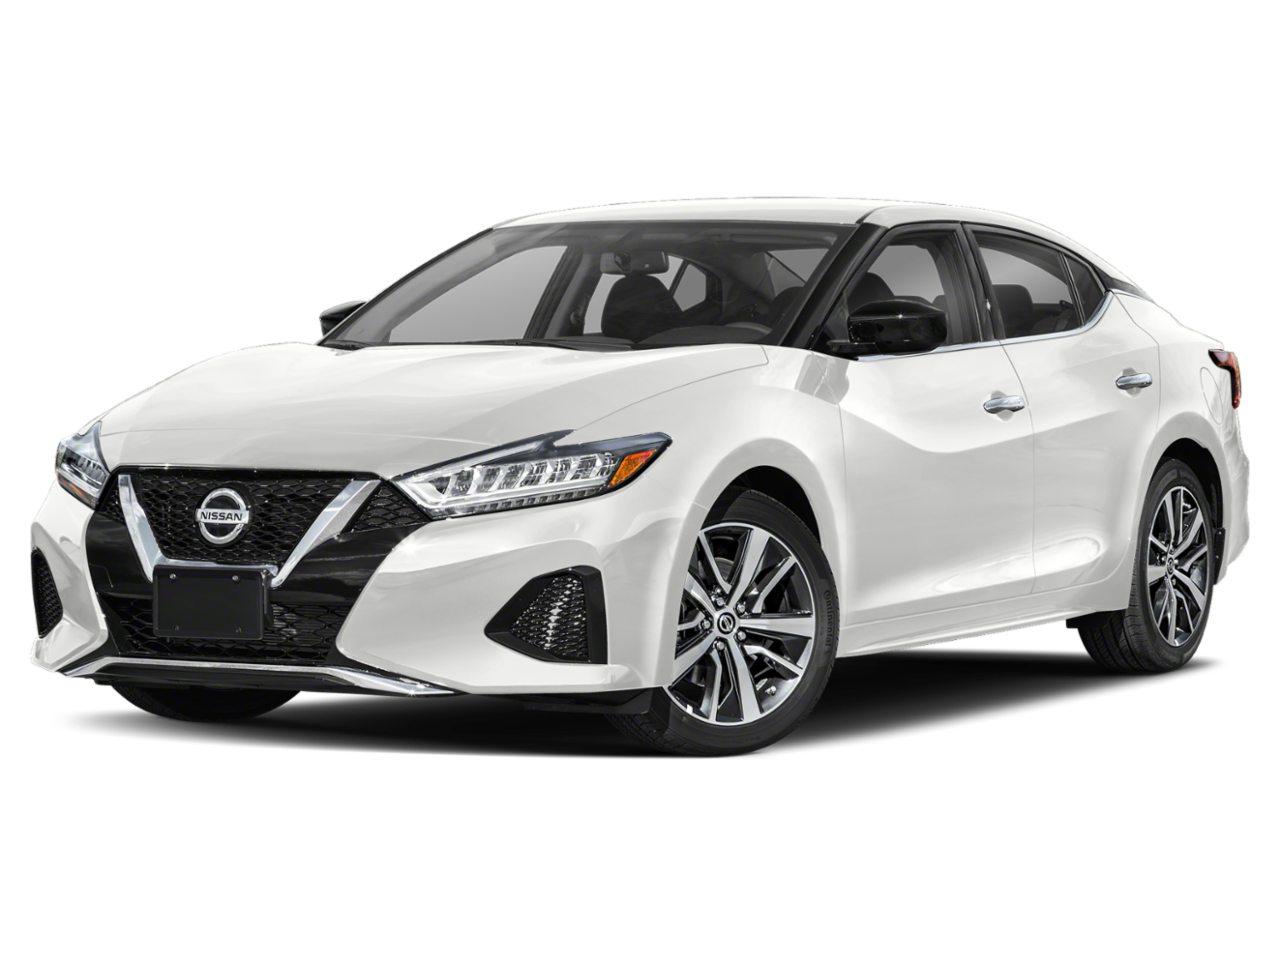 New Nissan Maxima from your Laurel MS dealership, Kim's Nissan.